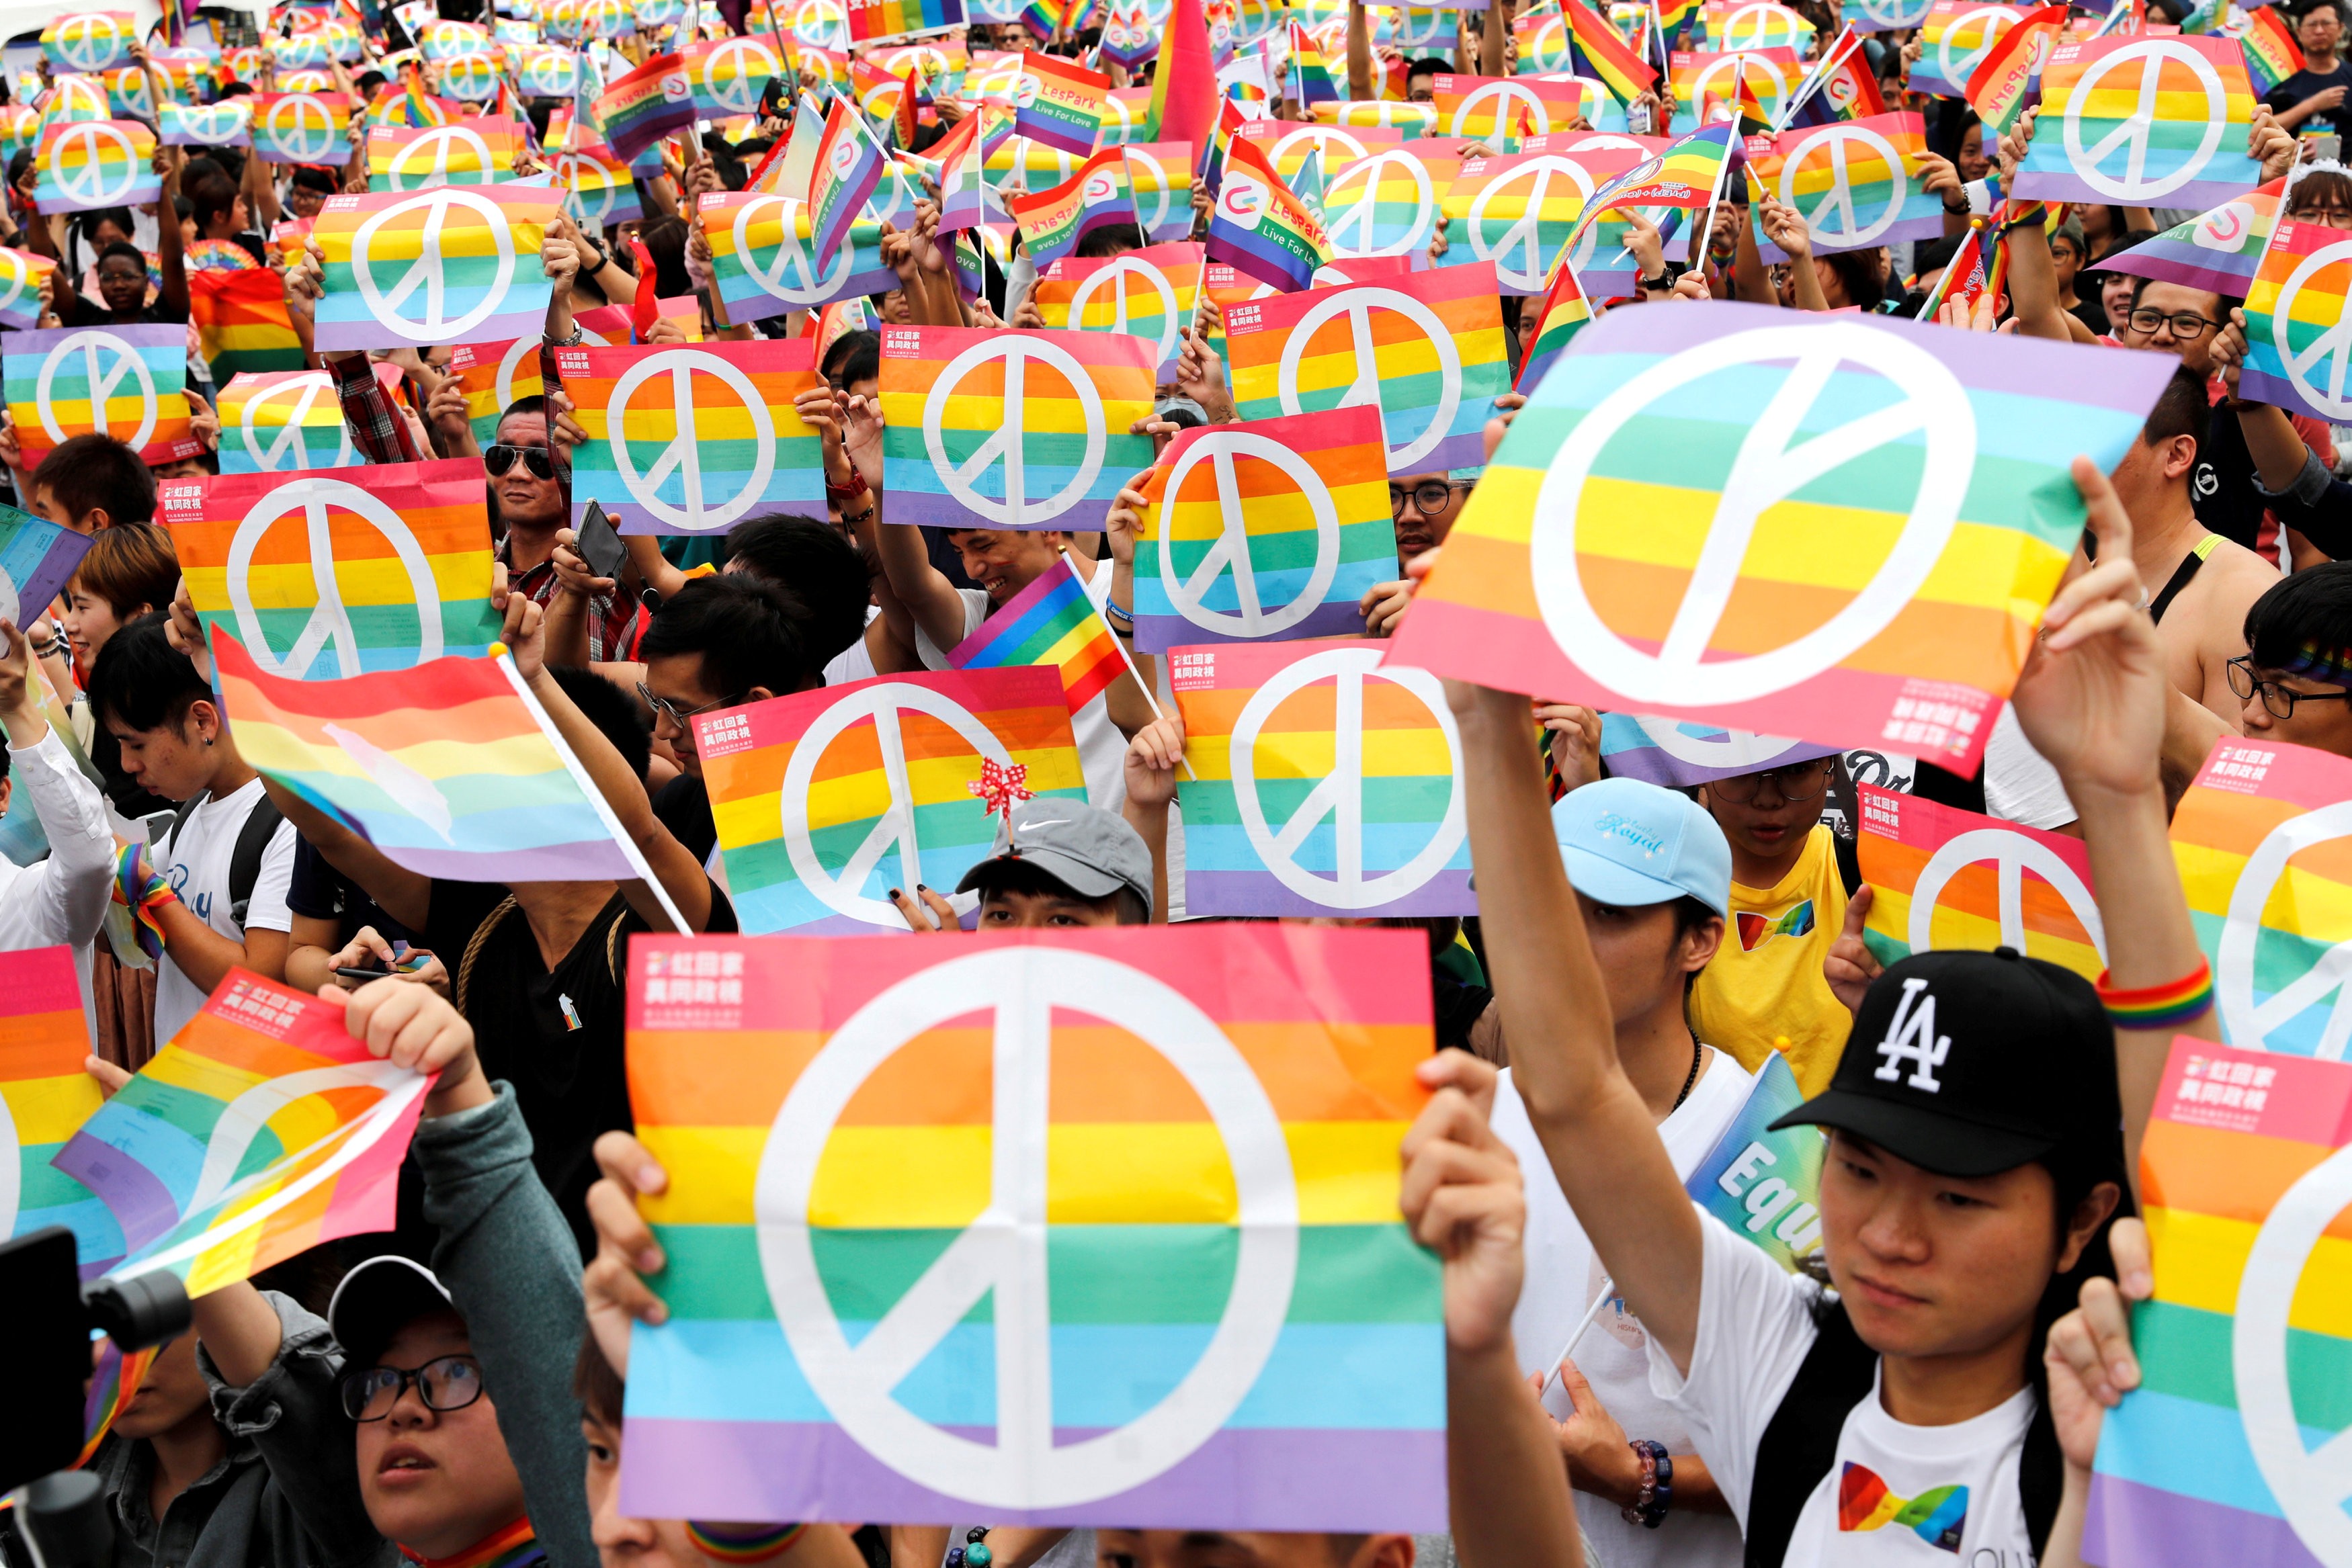 Marriage-equality supporters take part in a pride parade in Kaohsiung, Taiwan, on November 25 after losing the same-sex marriage referendum. Photo: Reuters